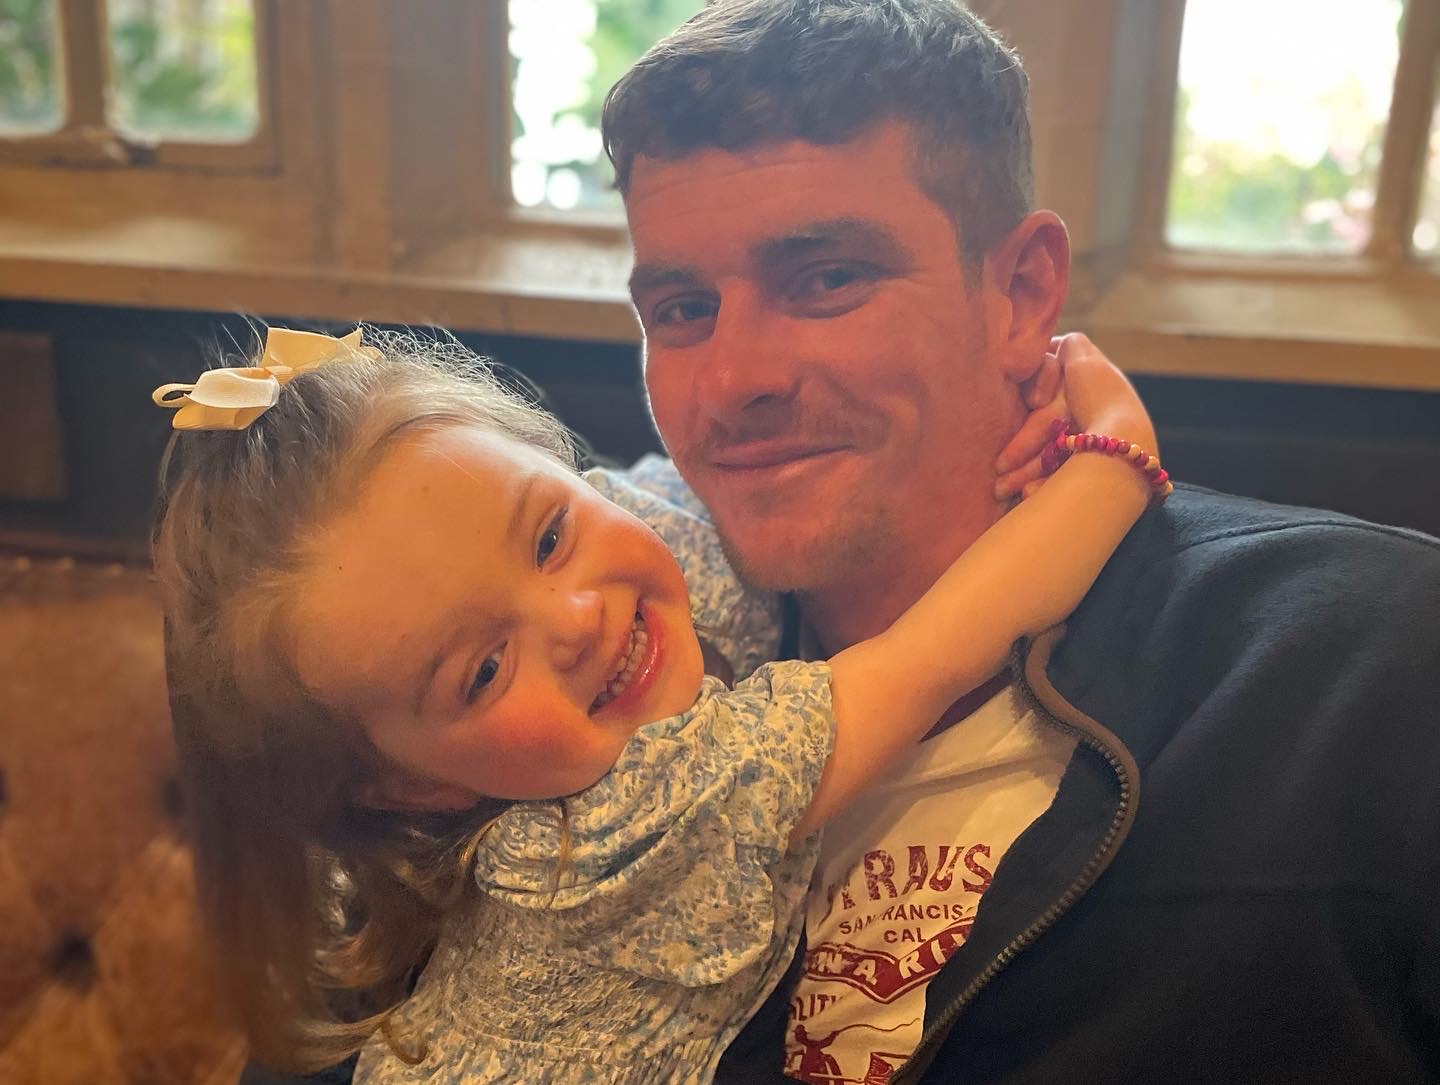 Knutsford Guardian: Jack Grogan is the best daddy to our little girl Bonnie.Bonnie’s face lights up when he enters the room - she just knows it’s play time!Fun, fun, fun!Lois Dewey, Aston By Budworth